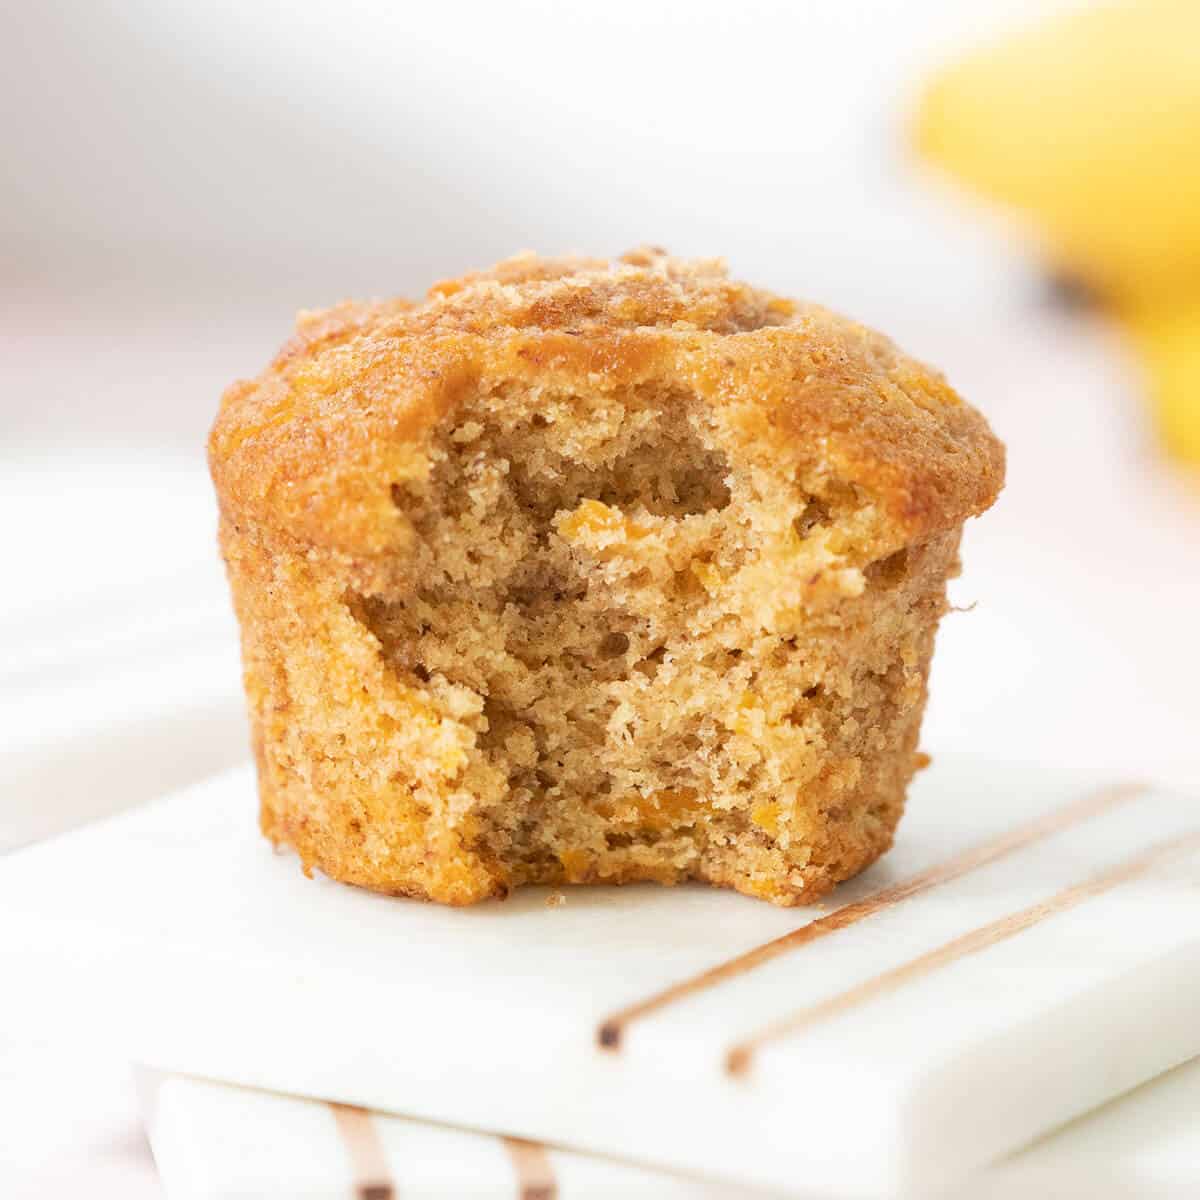 A single banana carrot muffin with a bite out